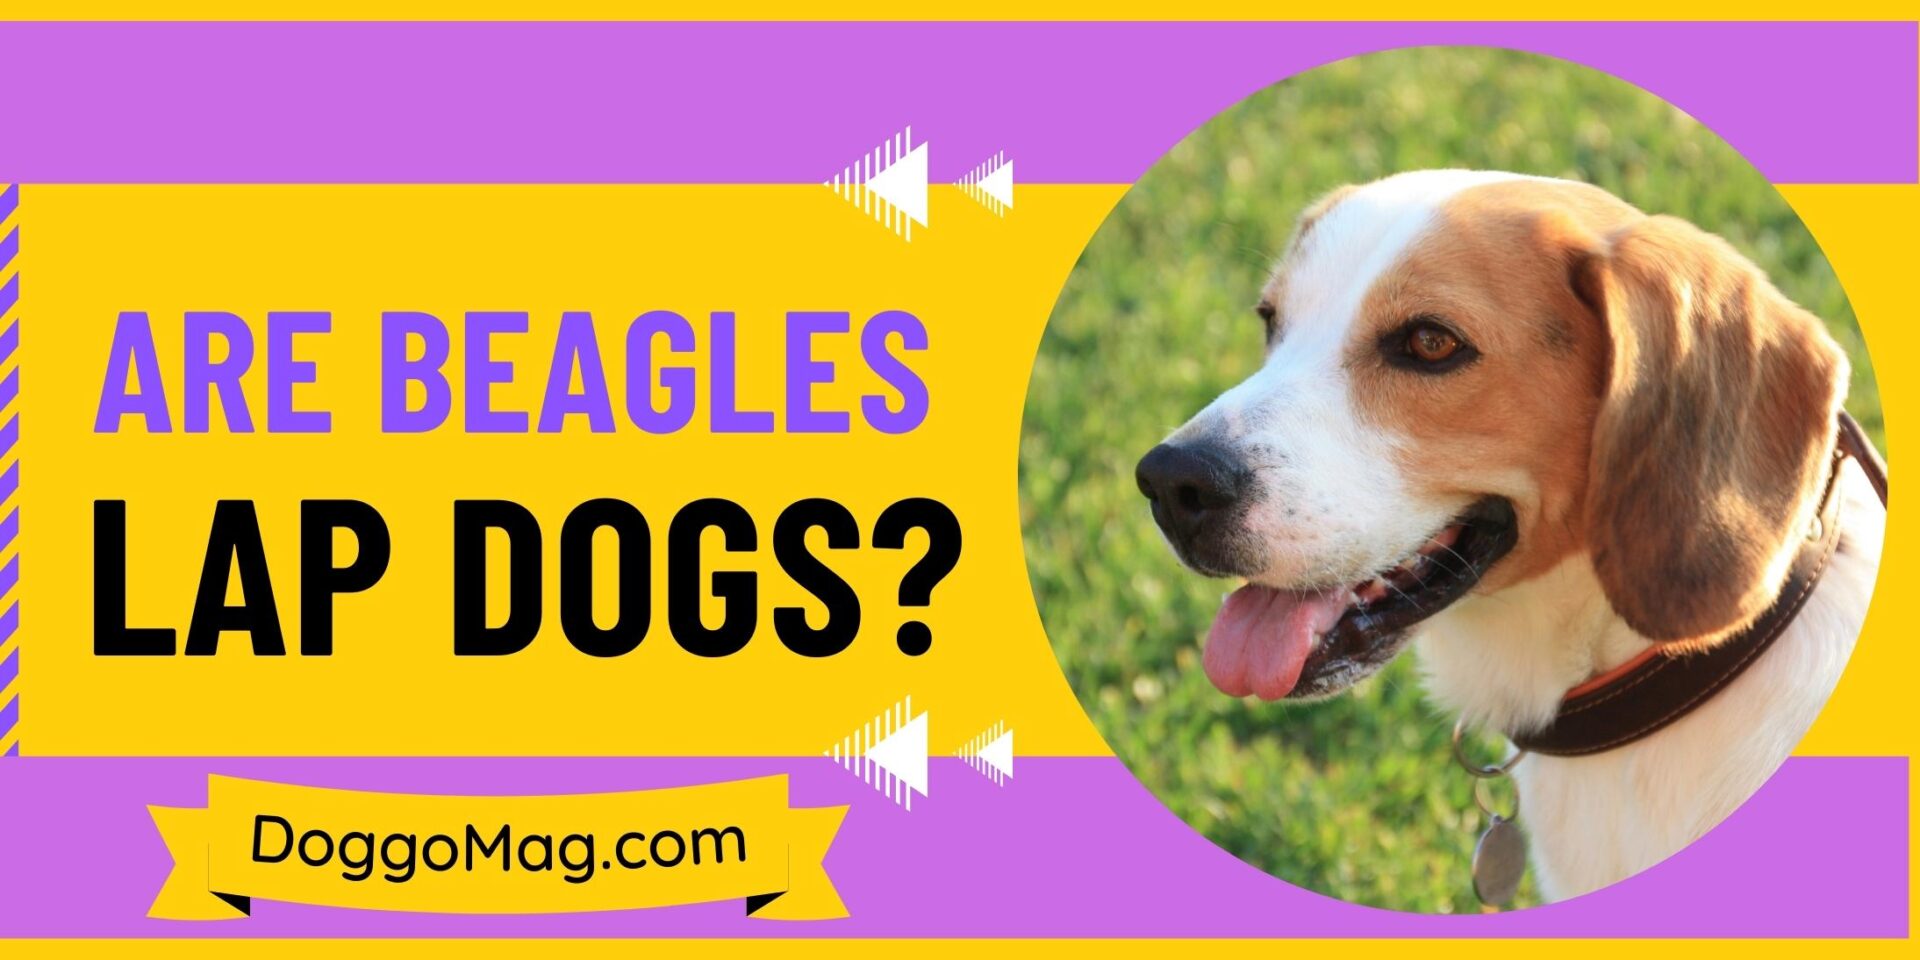 Are Beagles Lap Dogs